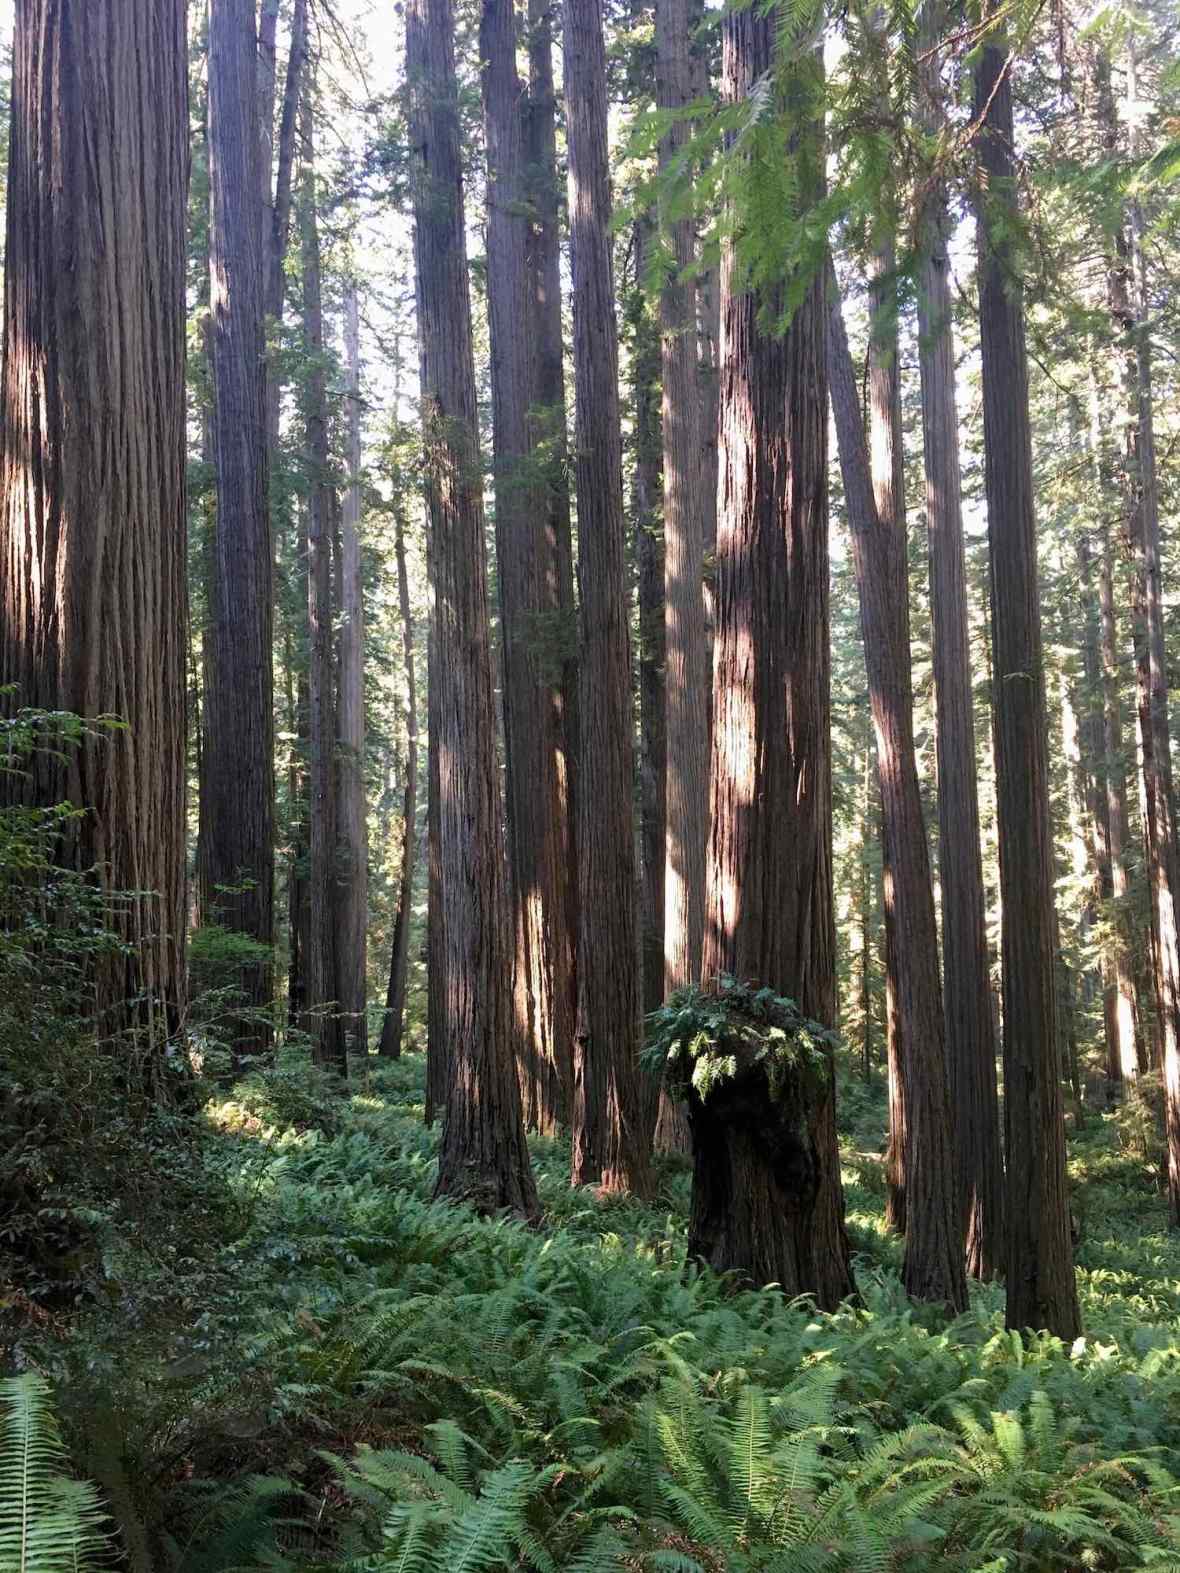 Towering old growth redwoods and fern groves at Jedediah Smith Redwoods State Park